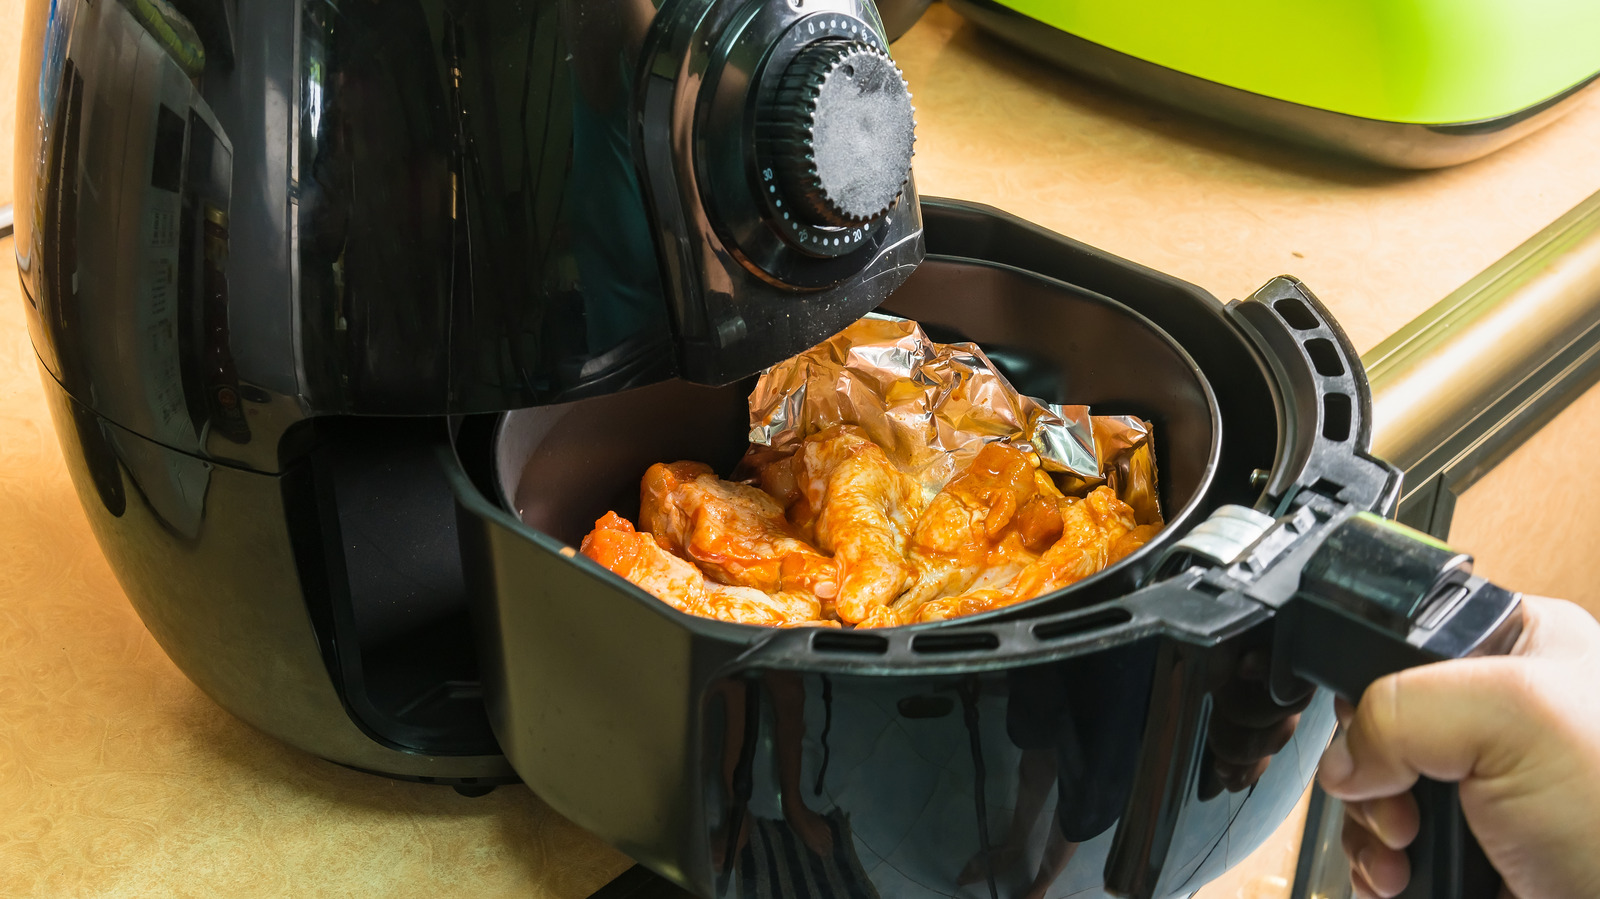 The Ninja Air Fryer This Restaurant Chef Suggests